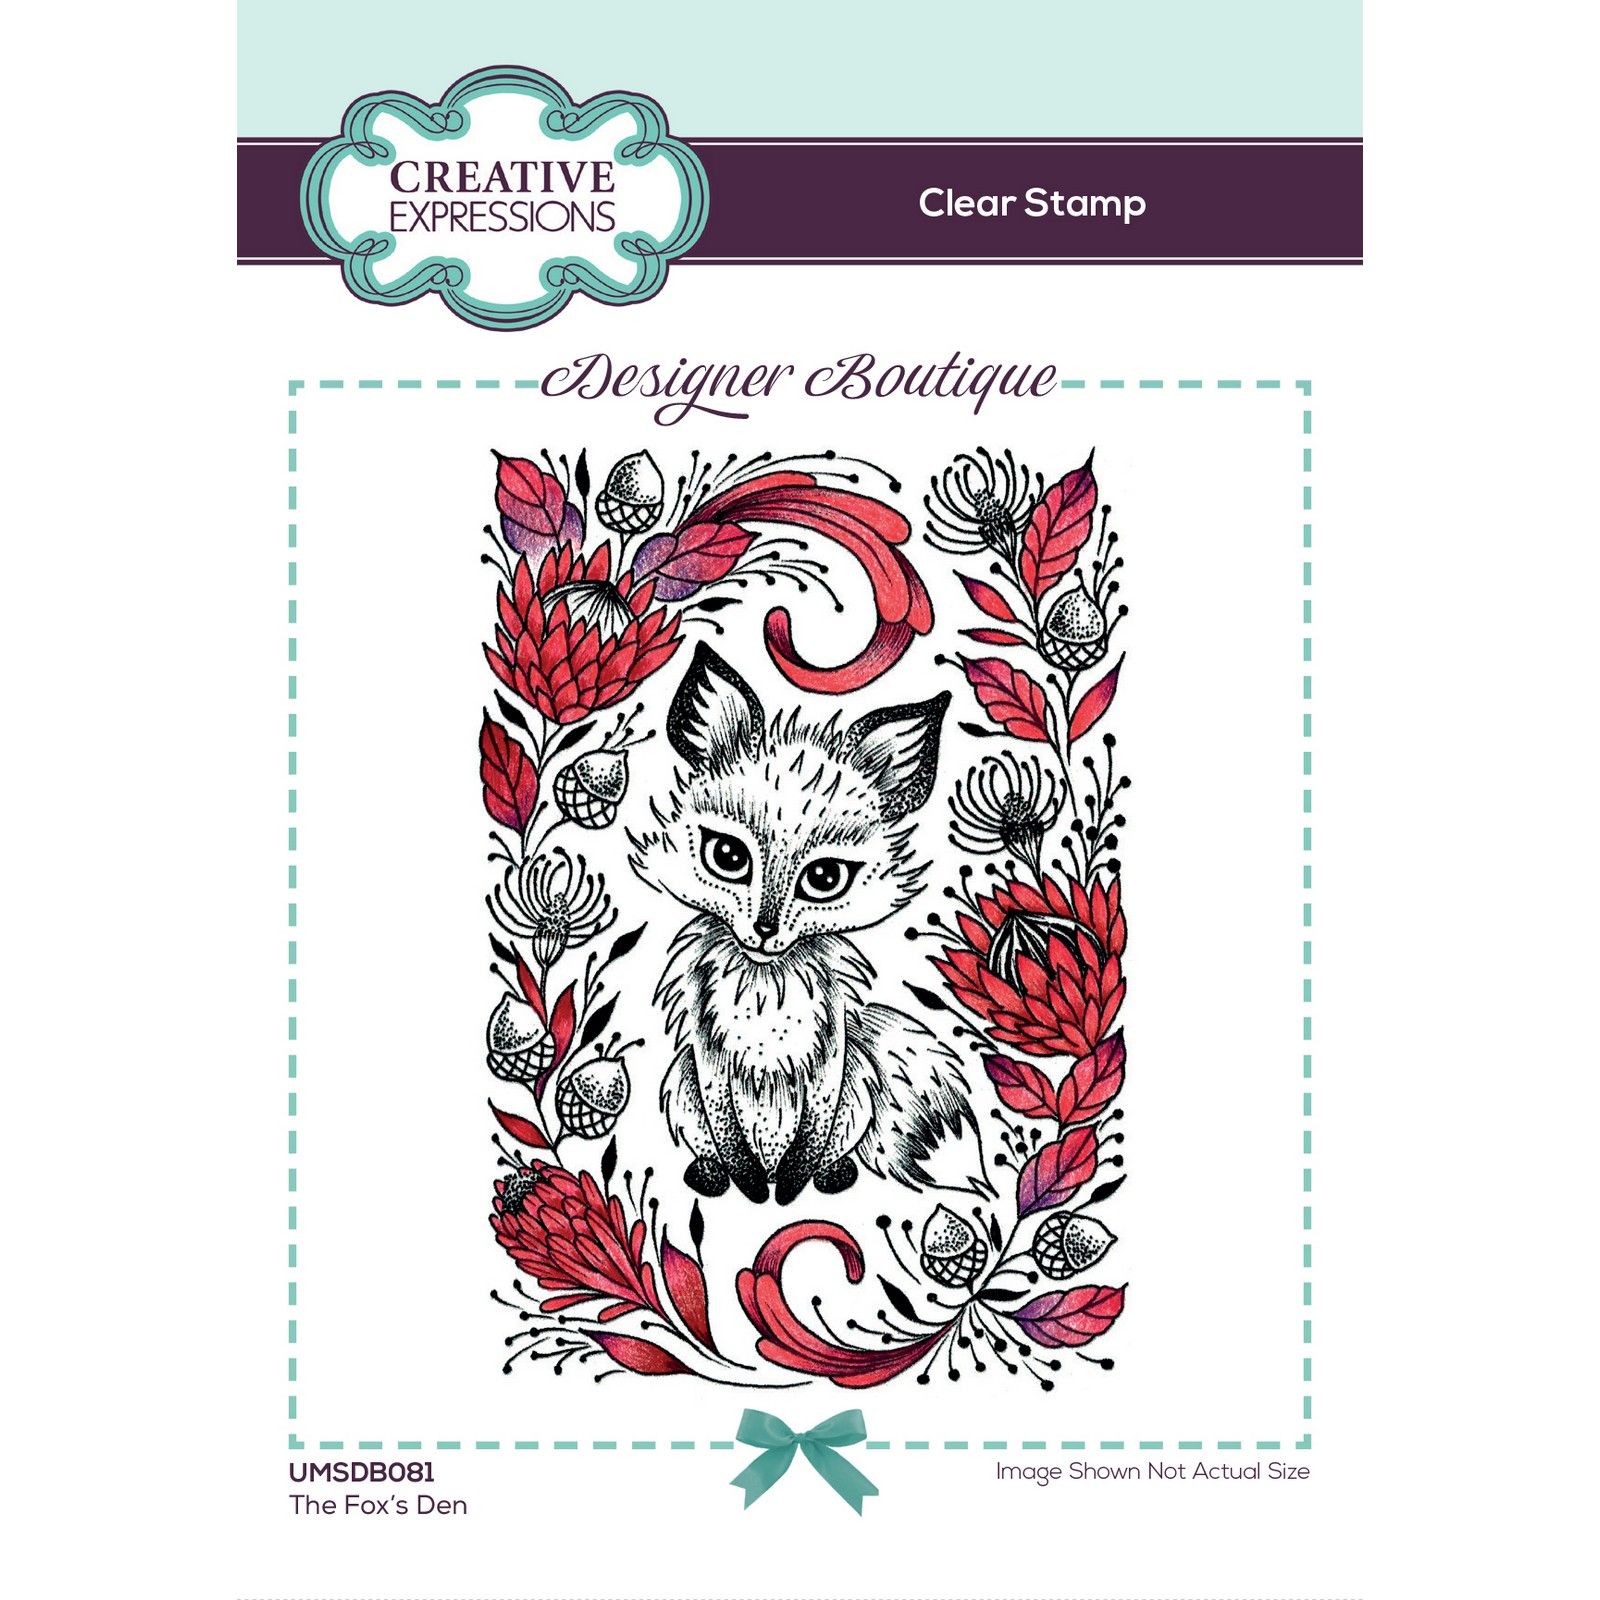 Creative Expressions • Designer boutique collection clear stempel set The fox's den A6